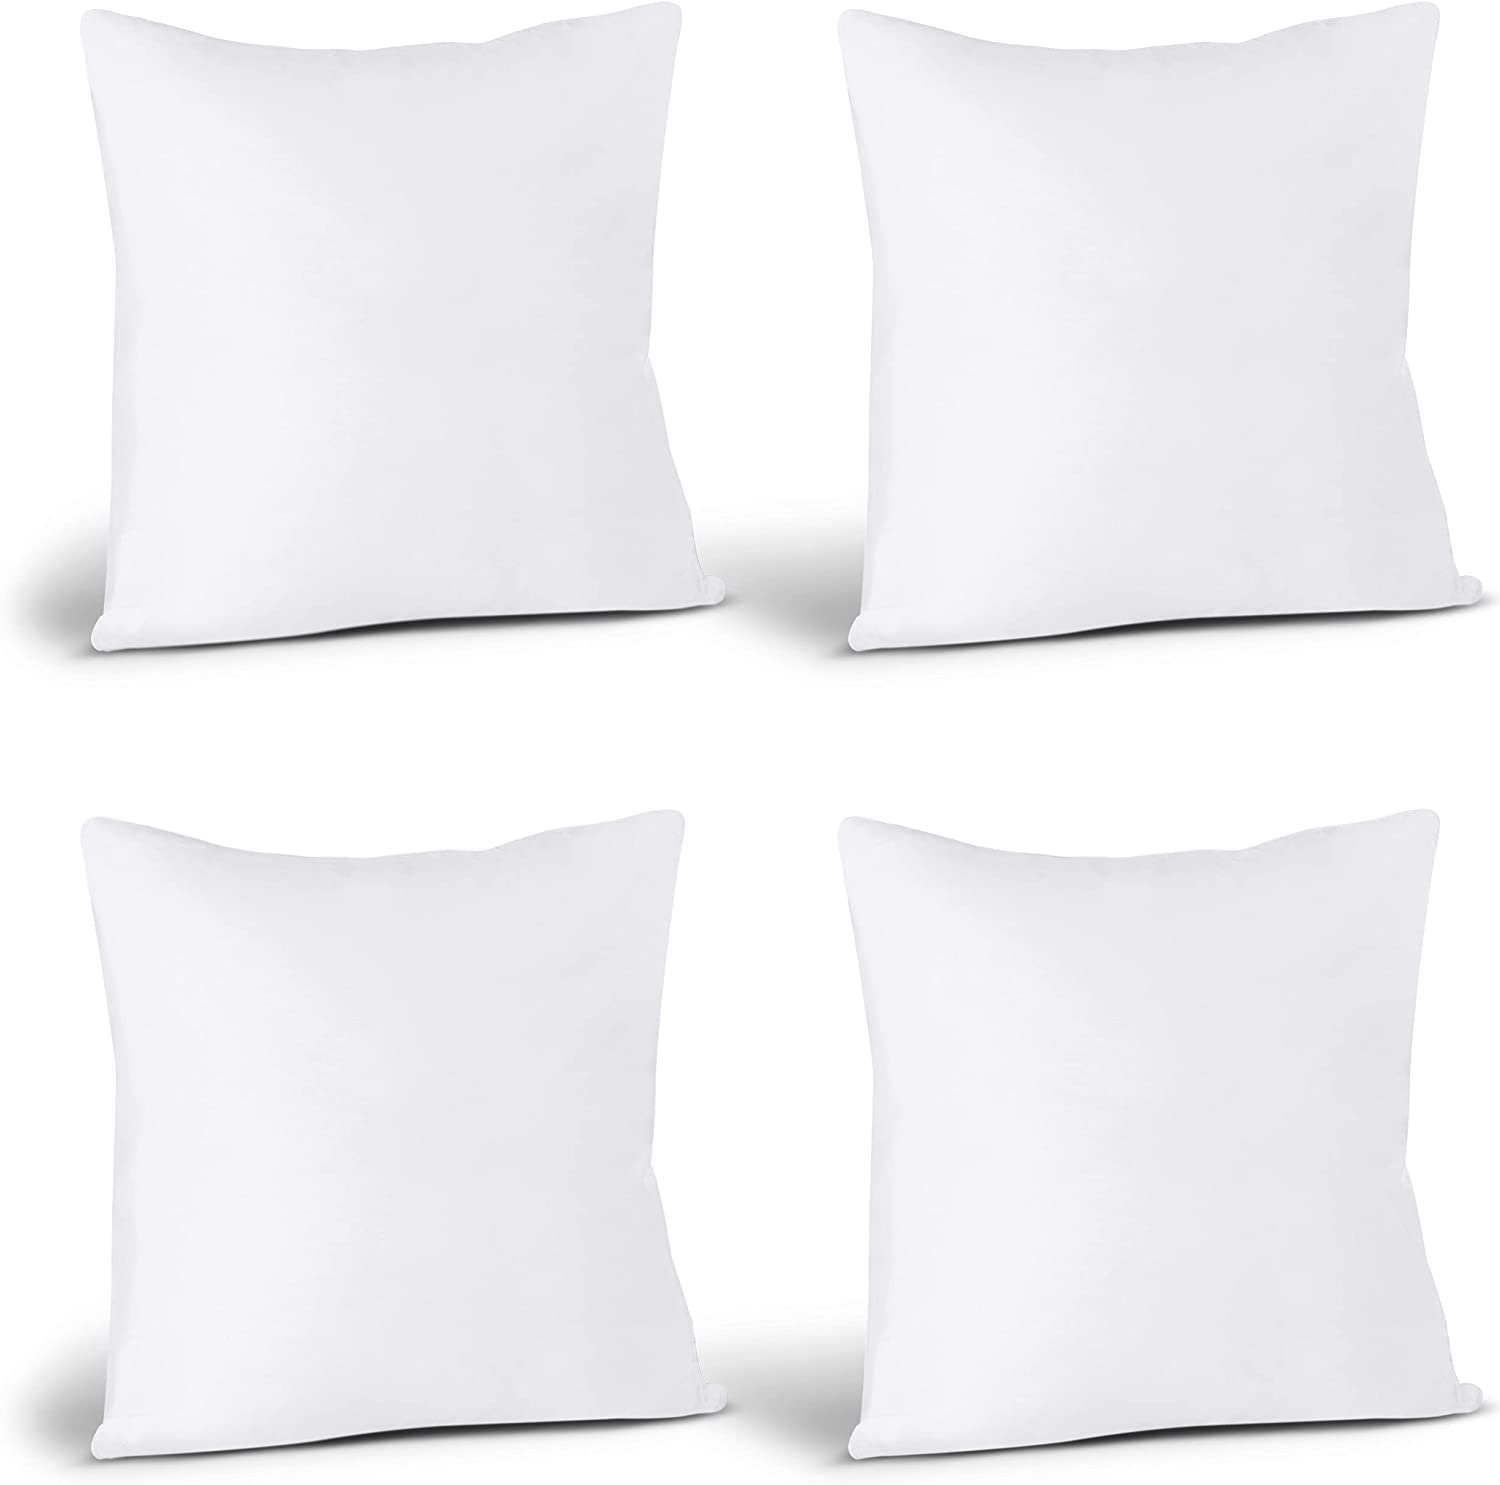  Utopia Bedding Throw Pillows (Set of 4, White), 14 x 14 Inches  Pillows for Sofa, Bed and Couch Decorative Stuffer Pillows : Home & Kitchen